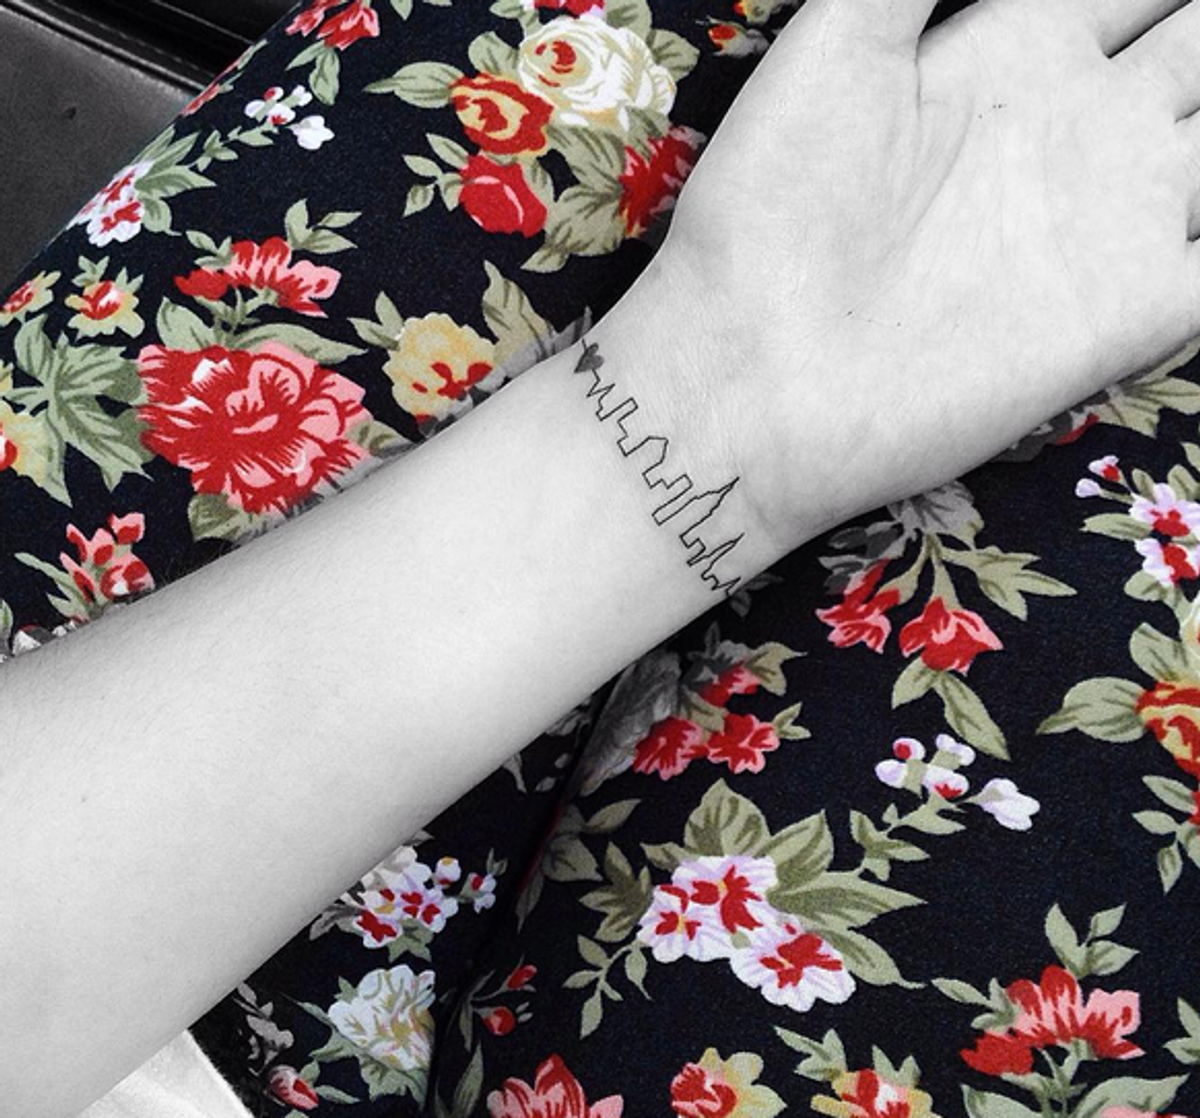 10 Delicate & Meaningful Tattoo Ideas You'll Fall in Love With